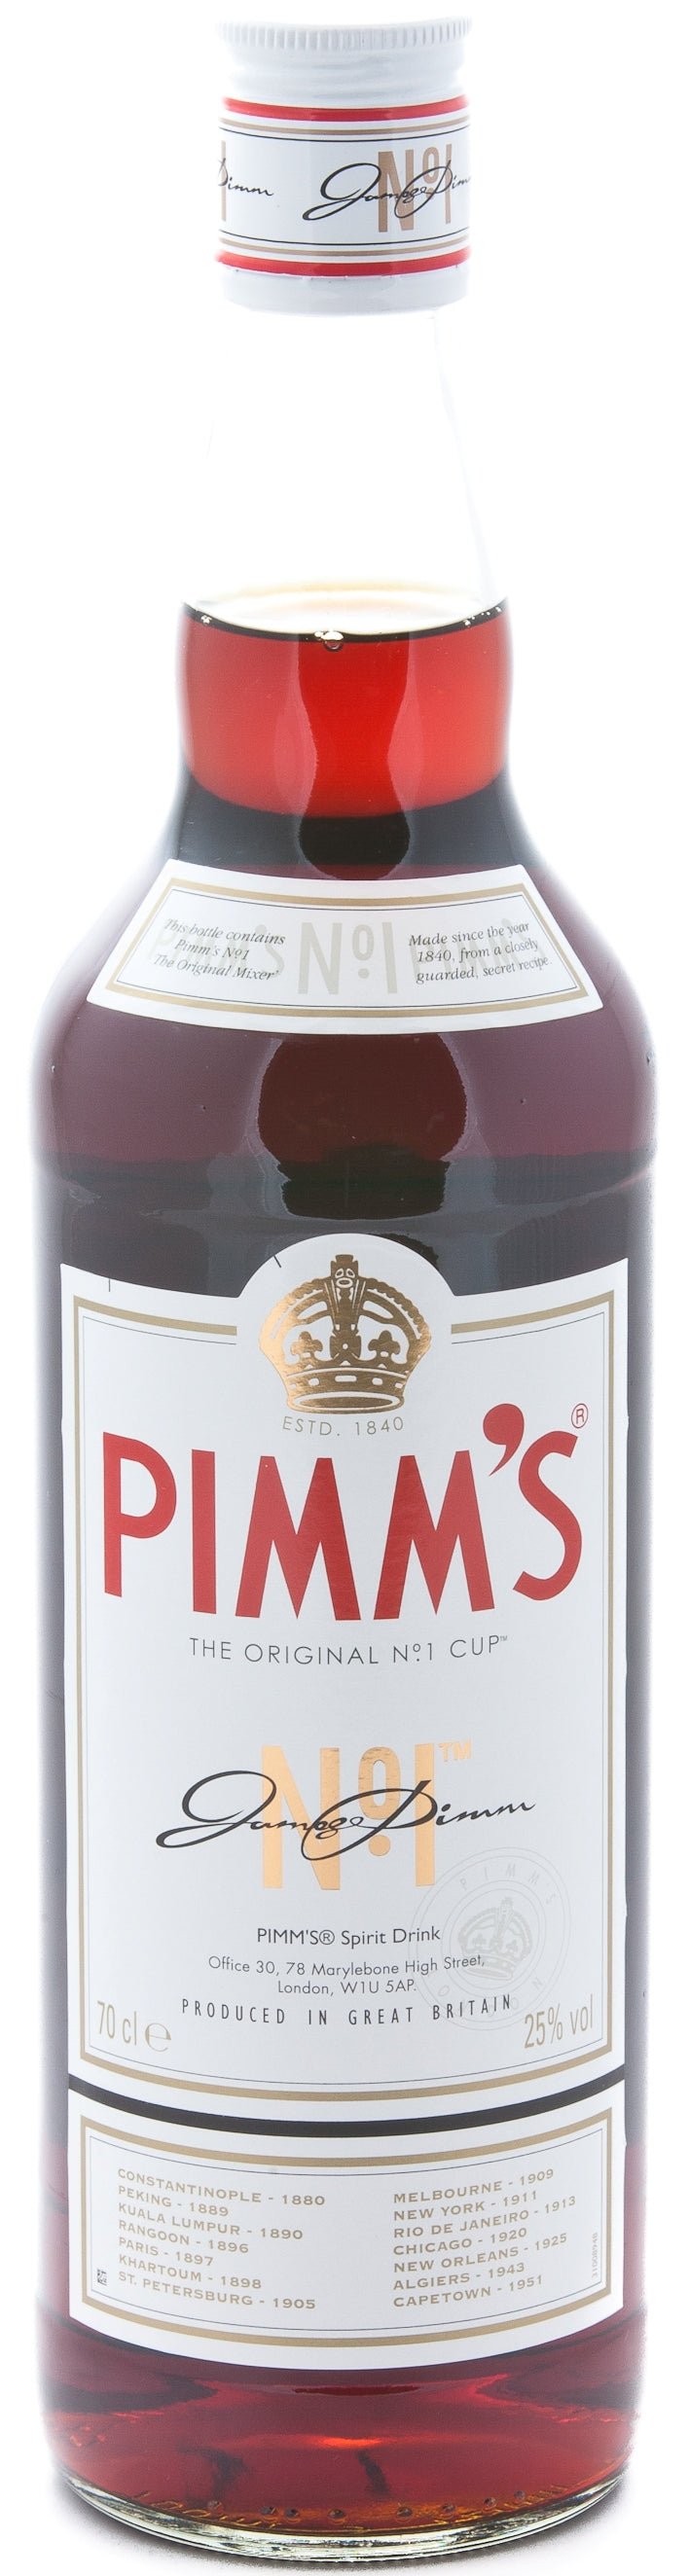 Pimm's No. 1 Fruit Cup Liqueur | Mitchell and Son Spirits